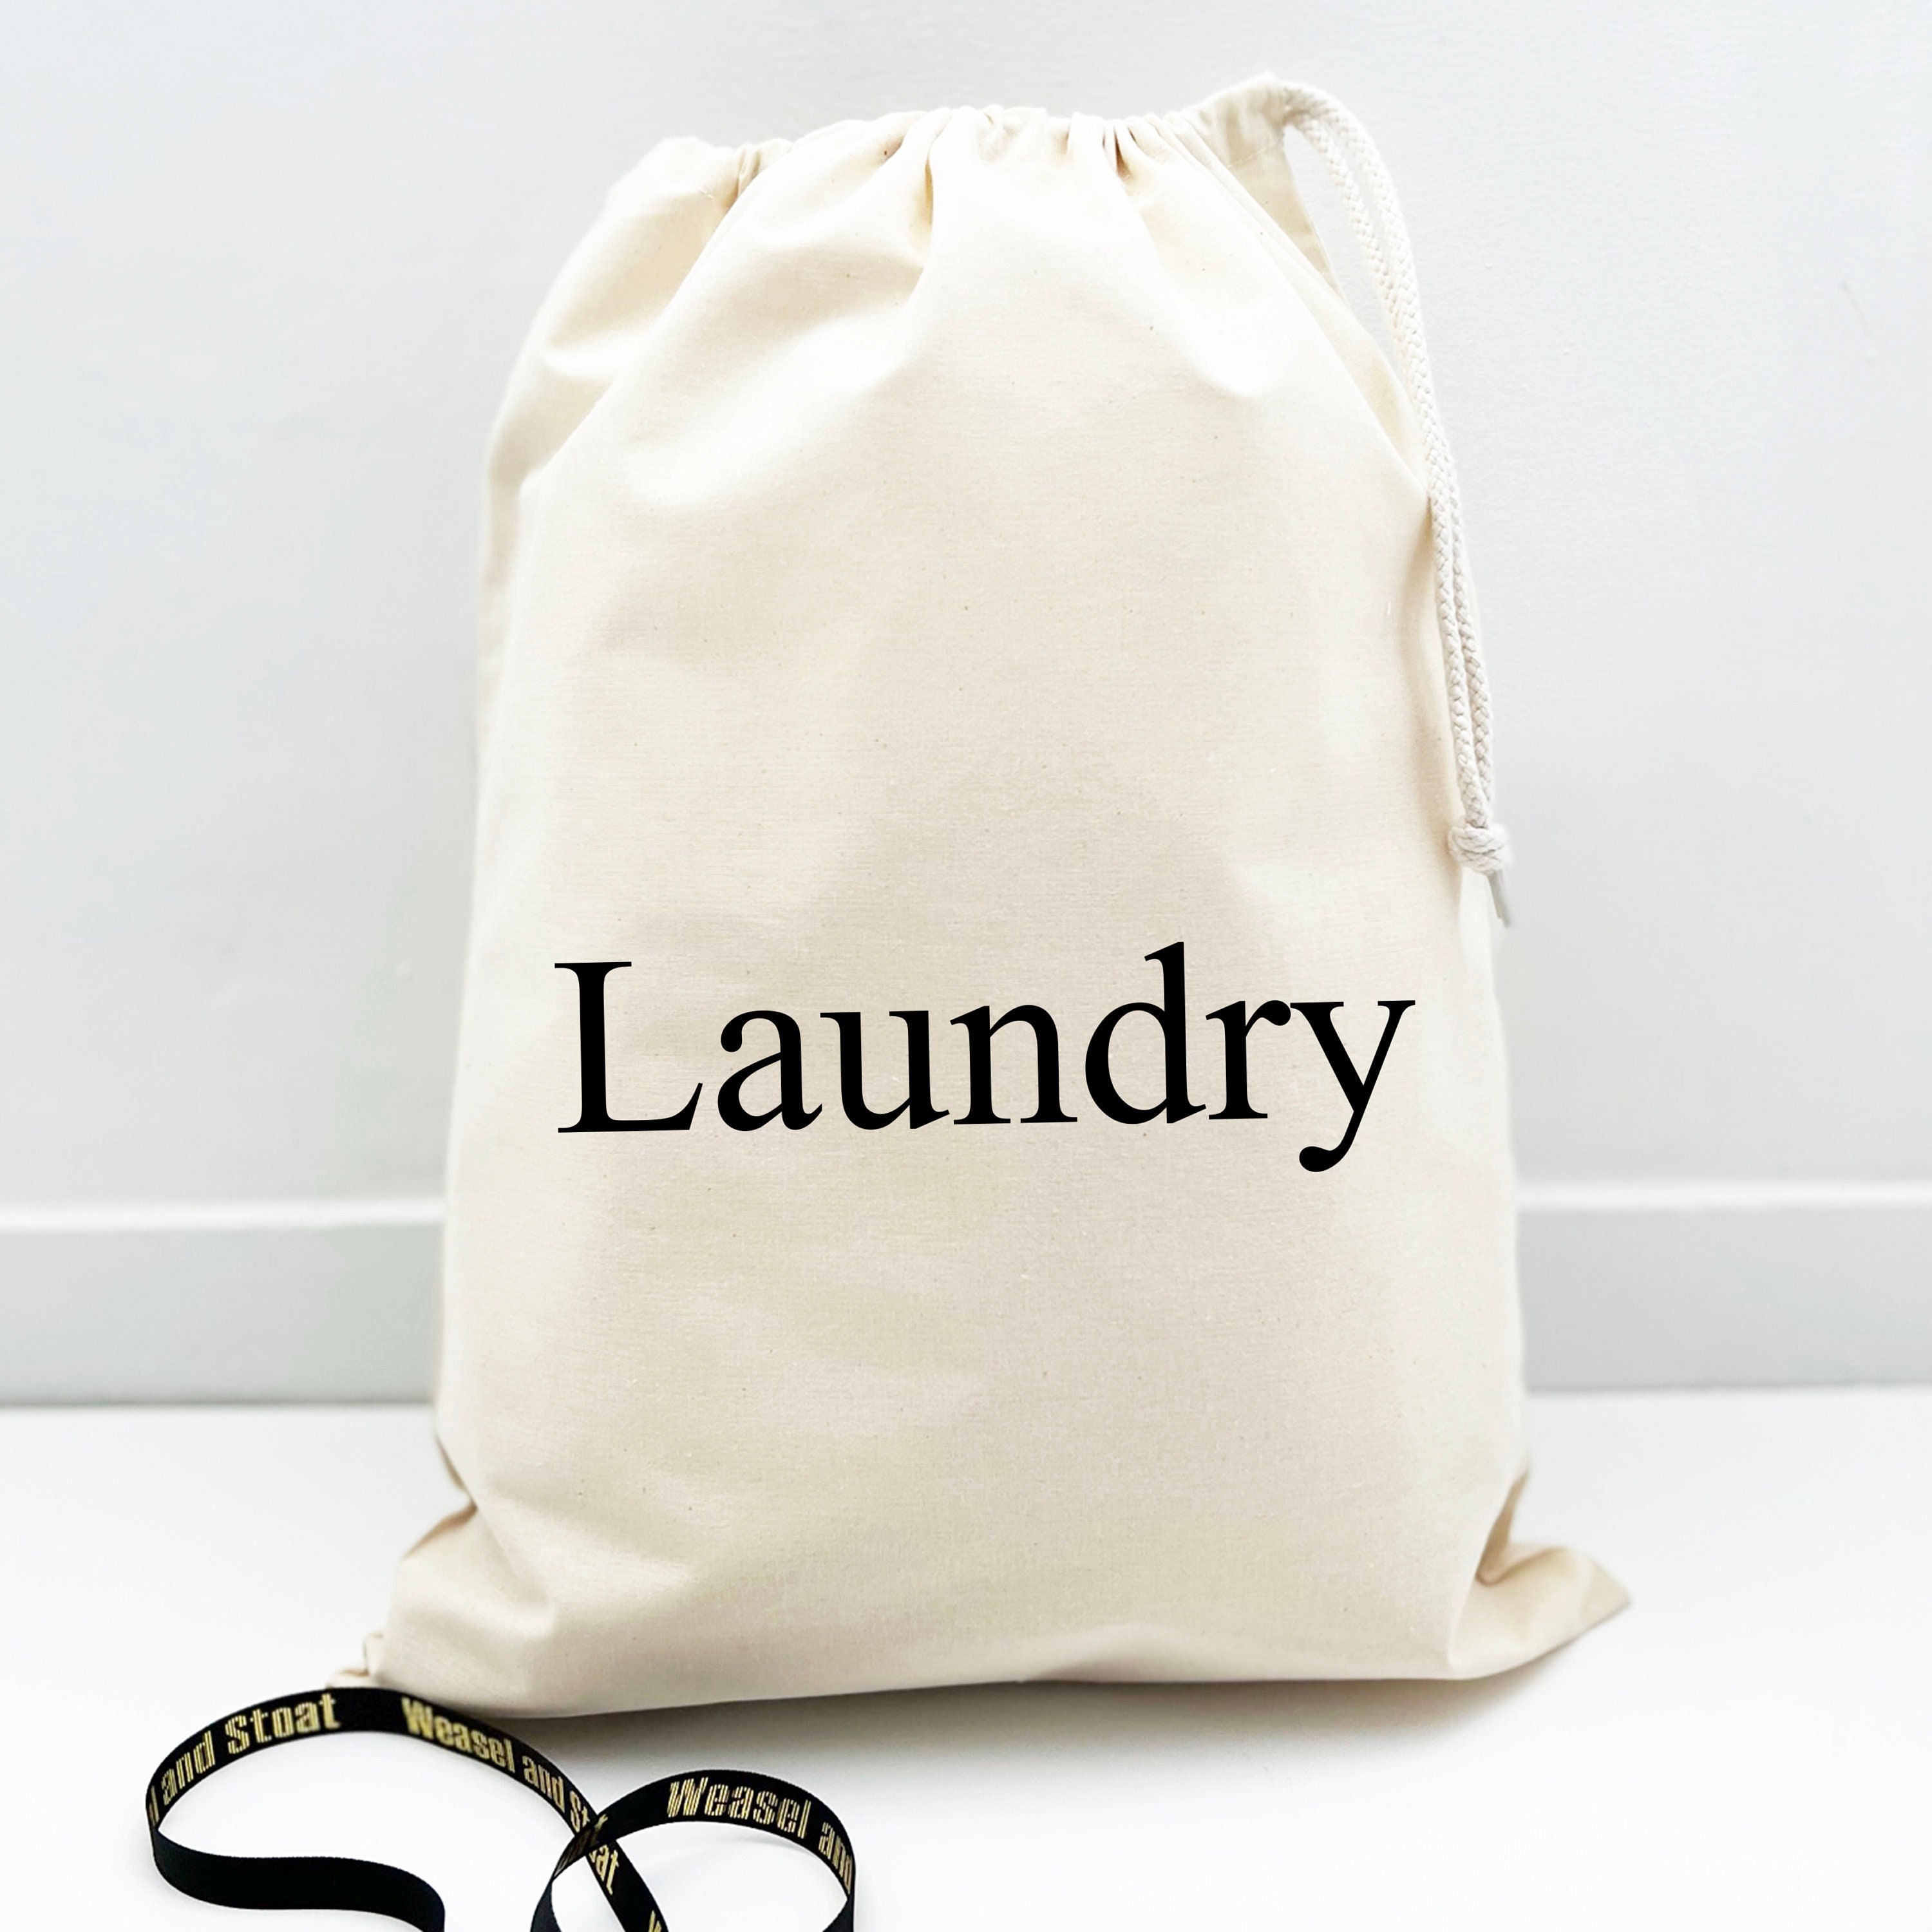 Home and Travel Laundry Bag Clothes Hamper Drawcord Canvas 